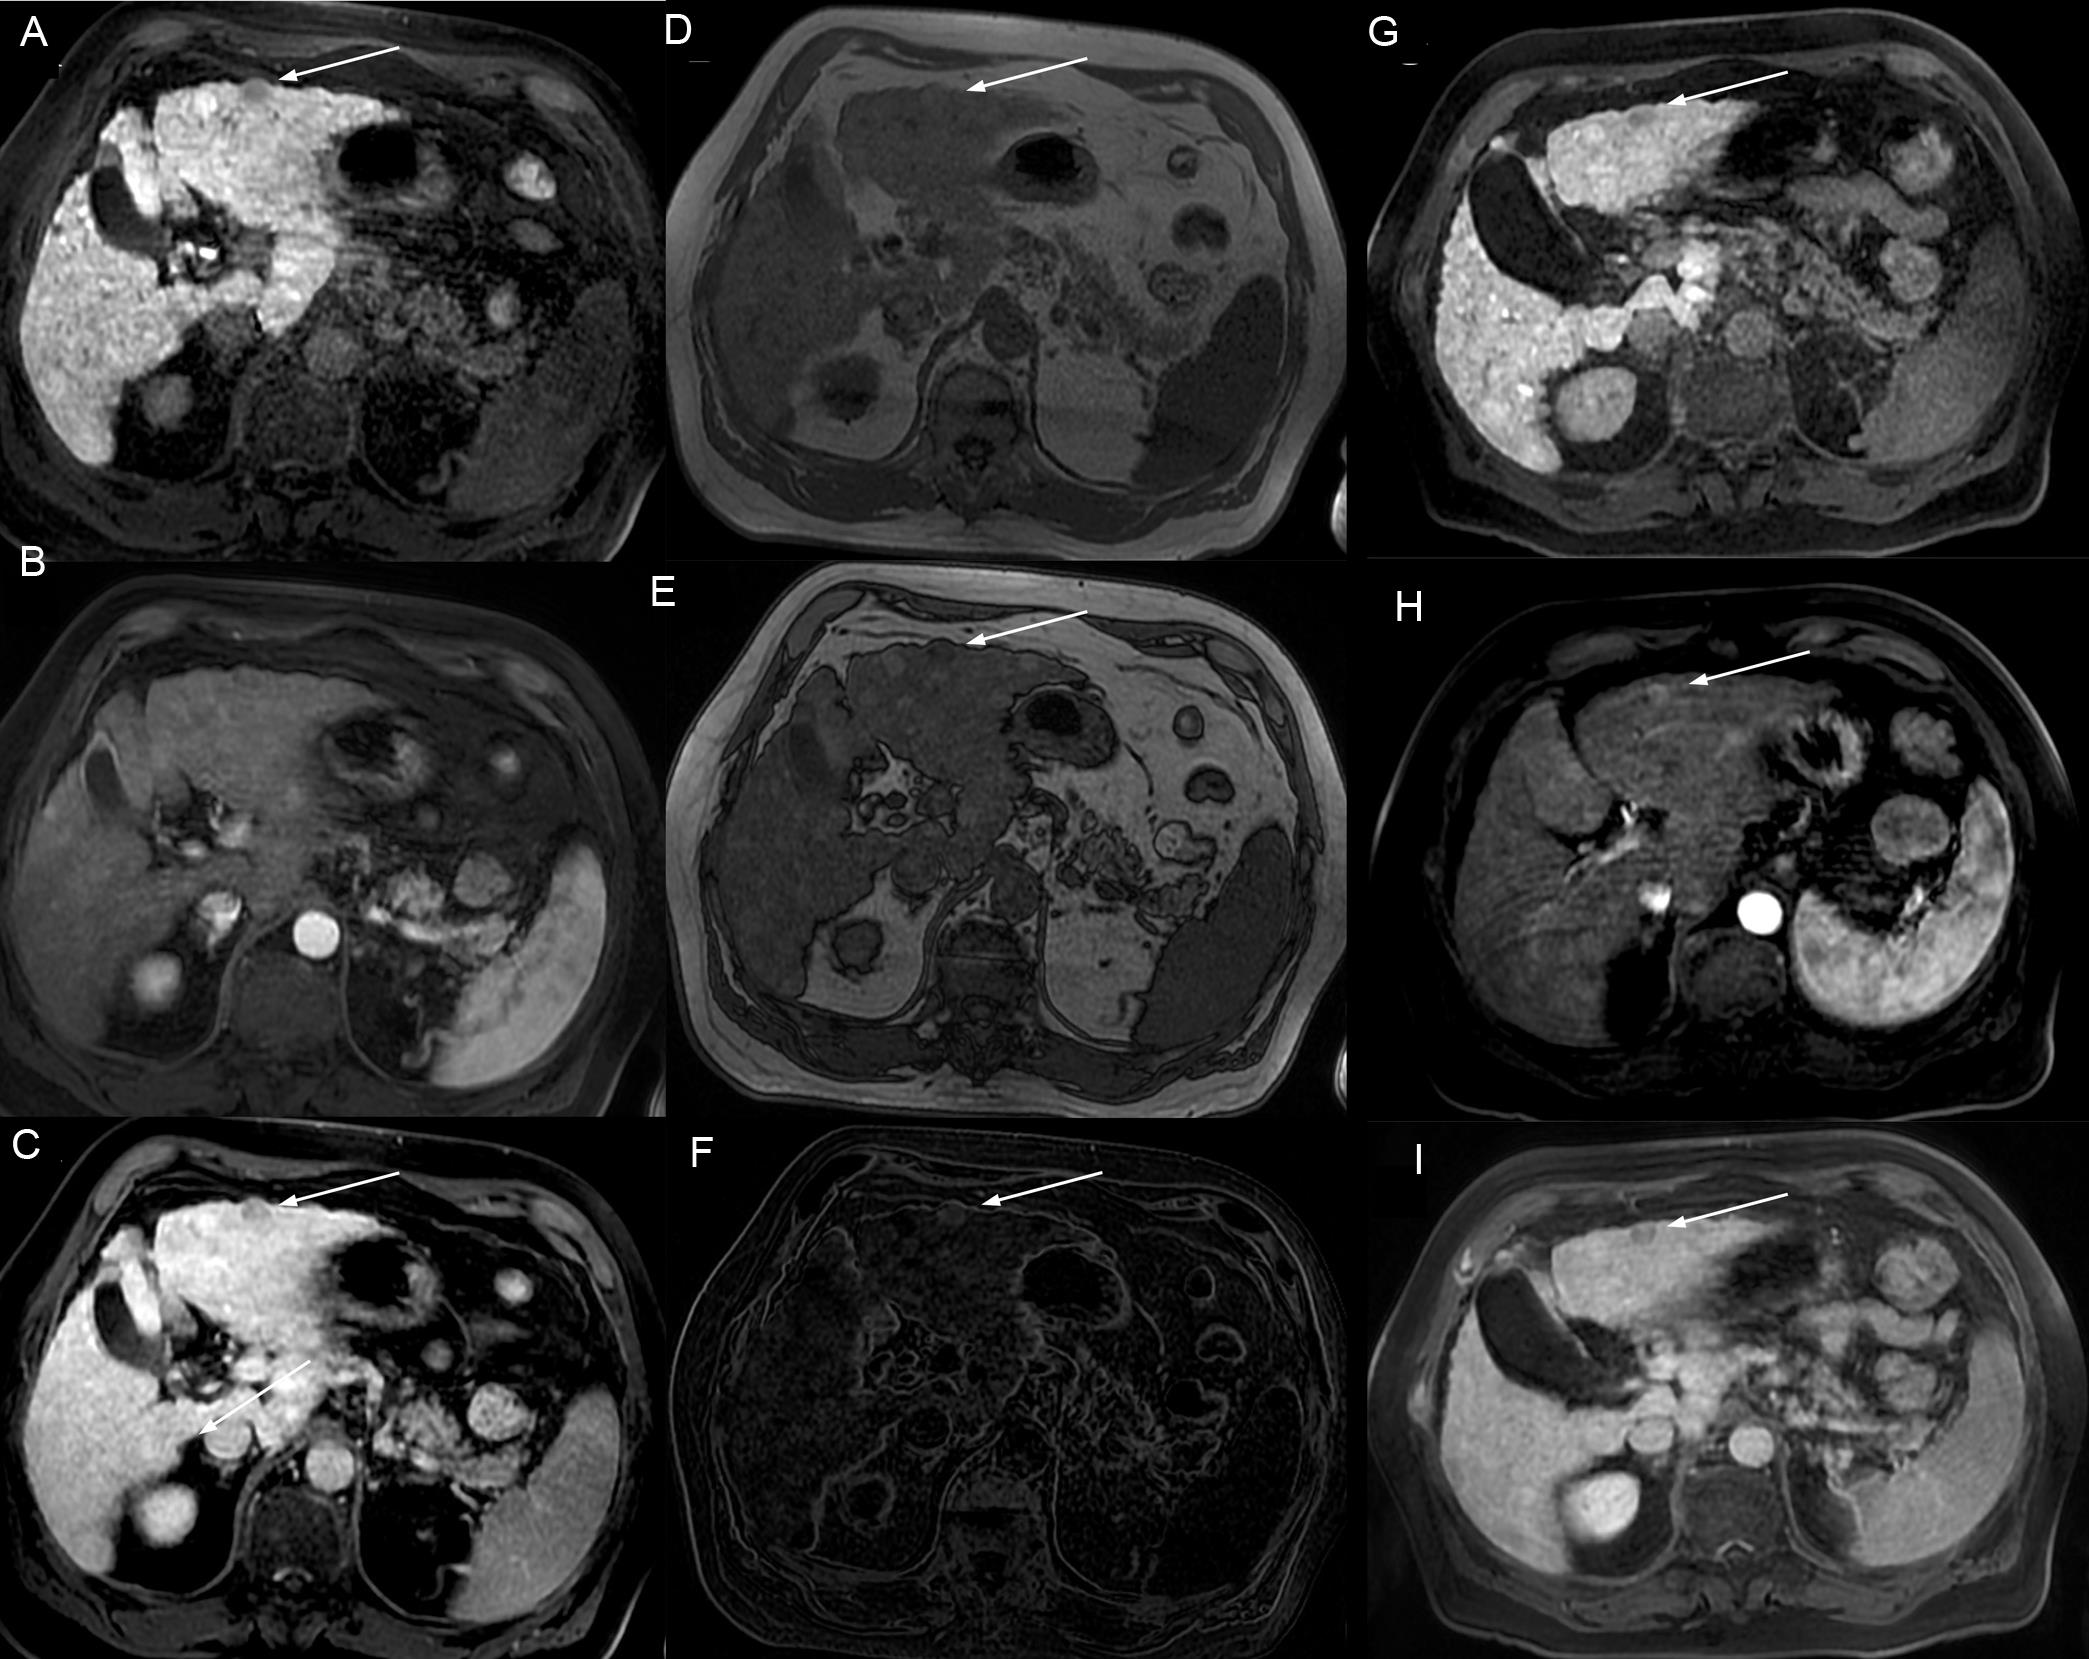 Axial MR images demonstrating a 14 mm hypointense nodule in the hepatobiliary phase (HBP) located in the liver segment 3.